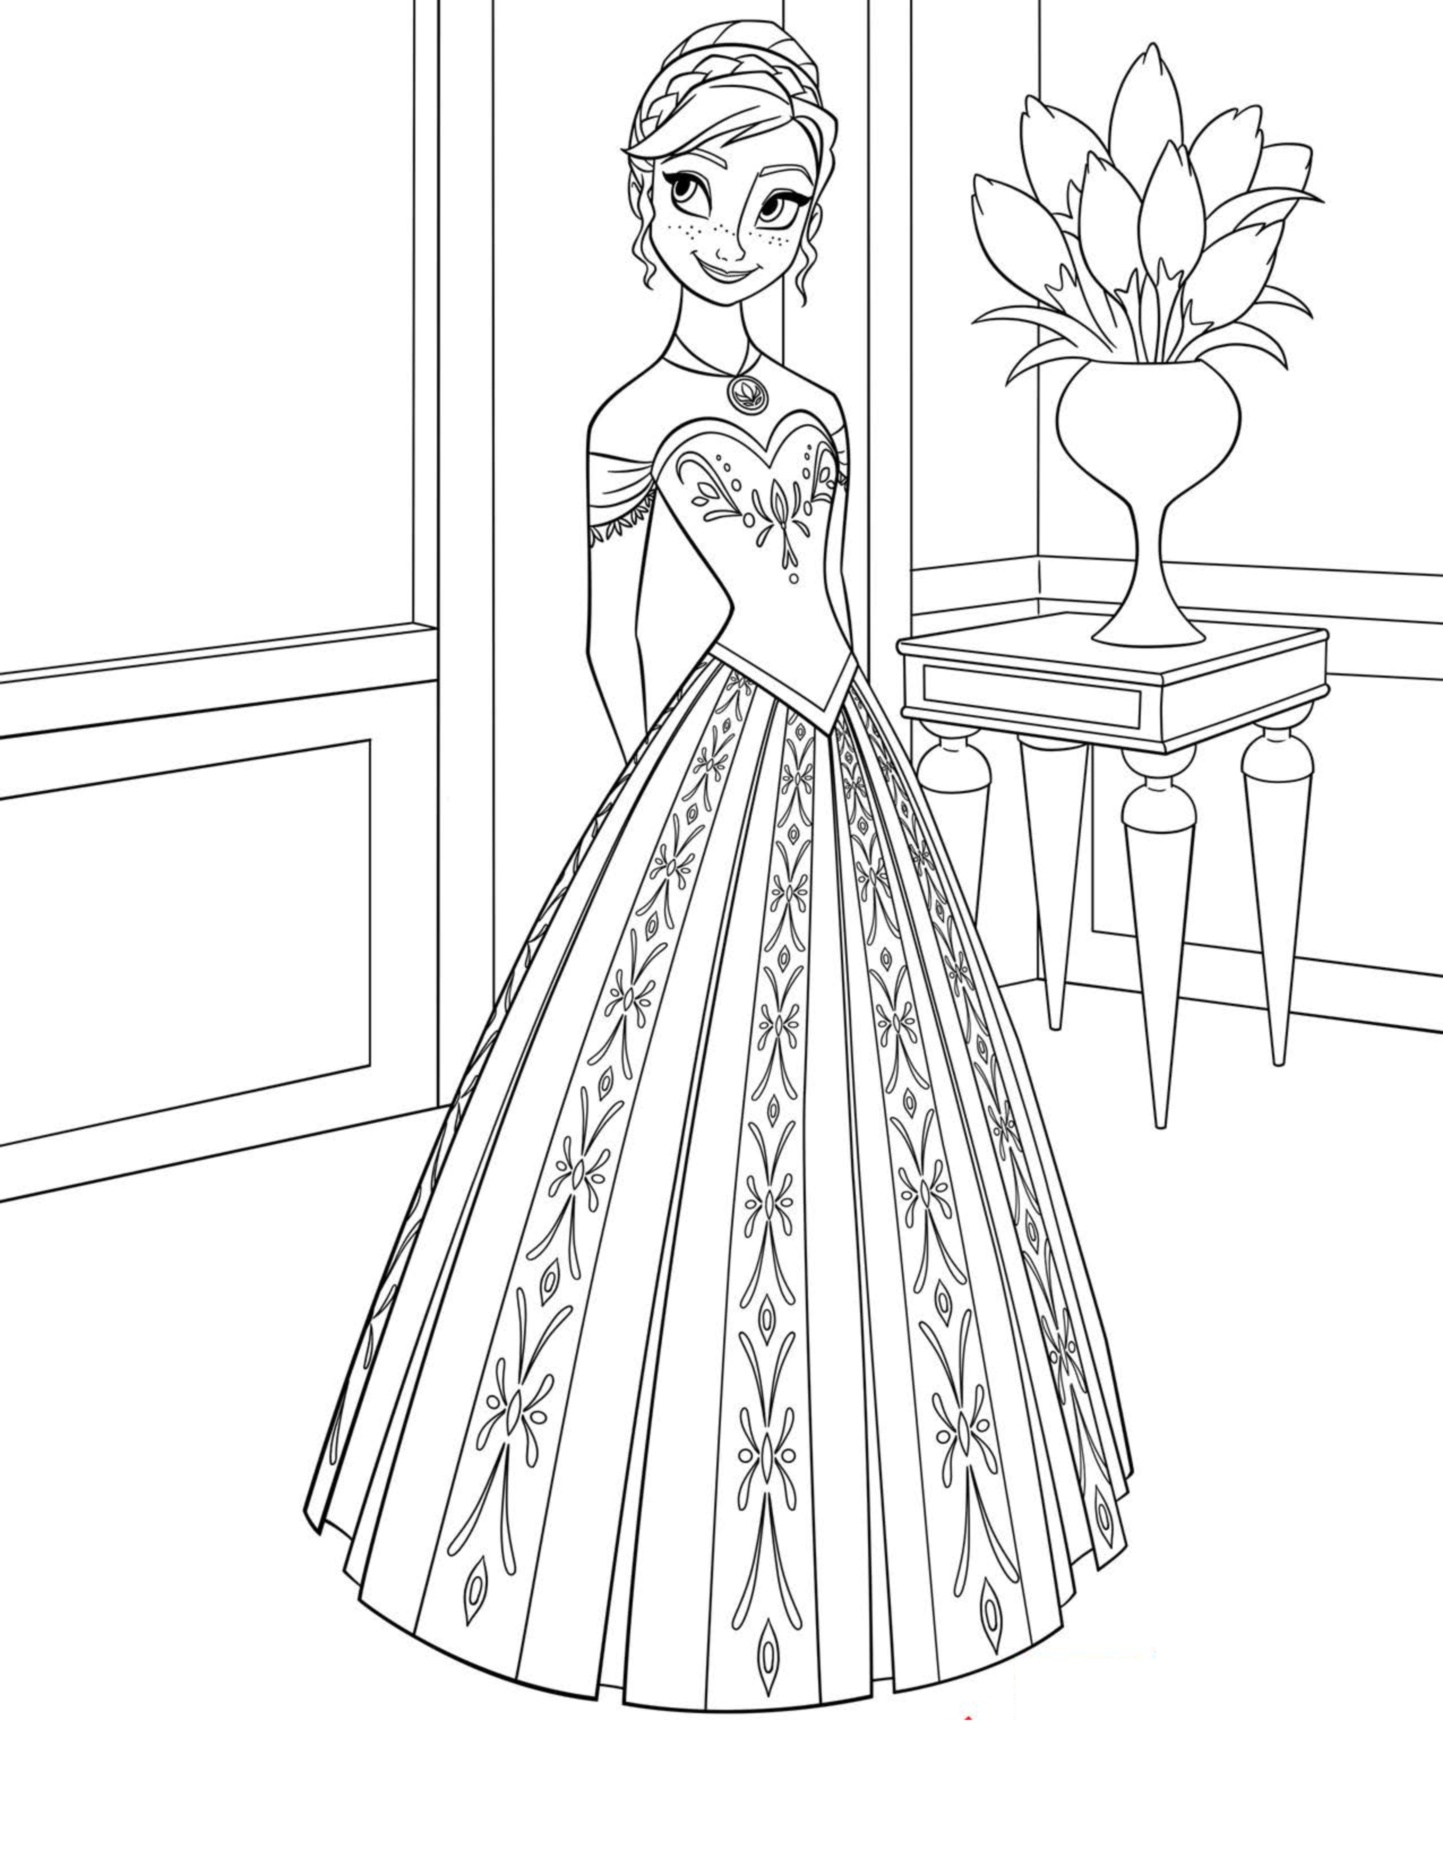 Free Frozen coloring page to print and color, for kids : Anna with a beautiful dress